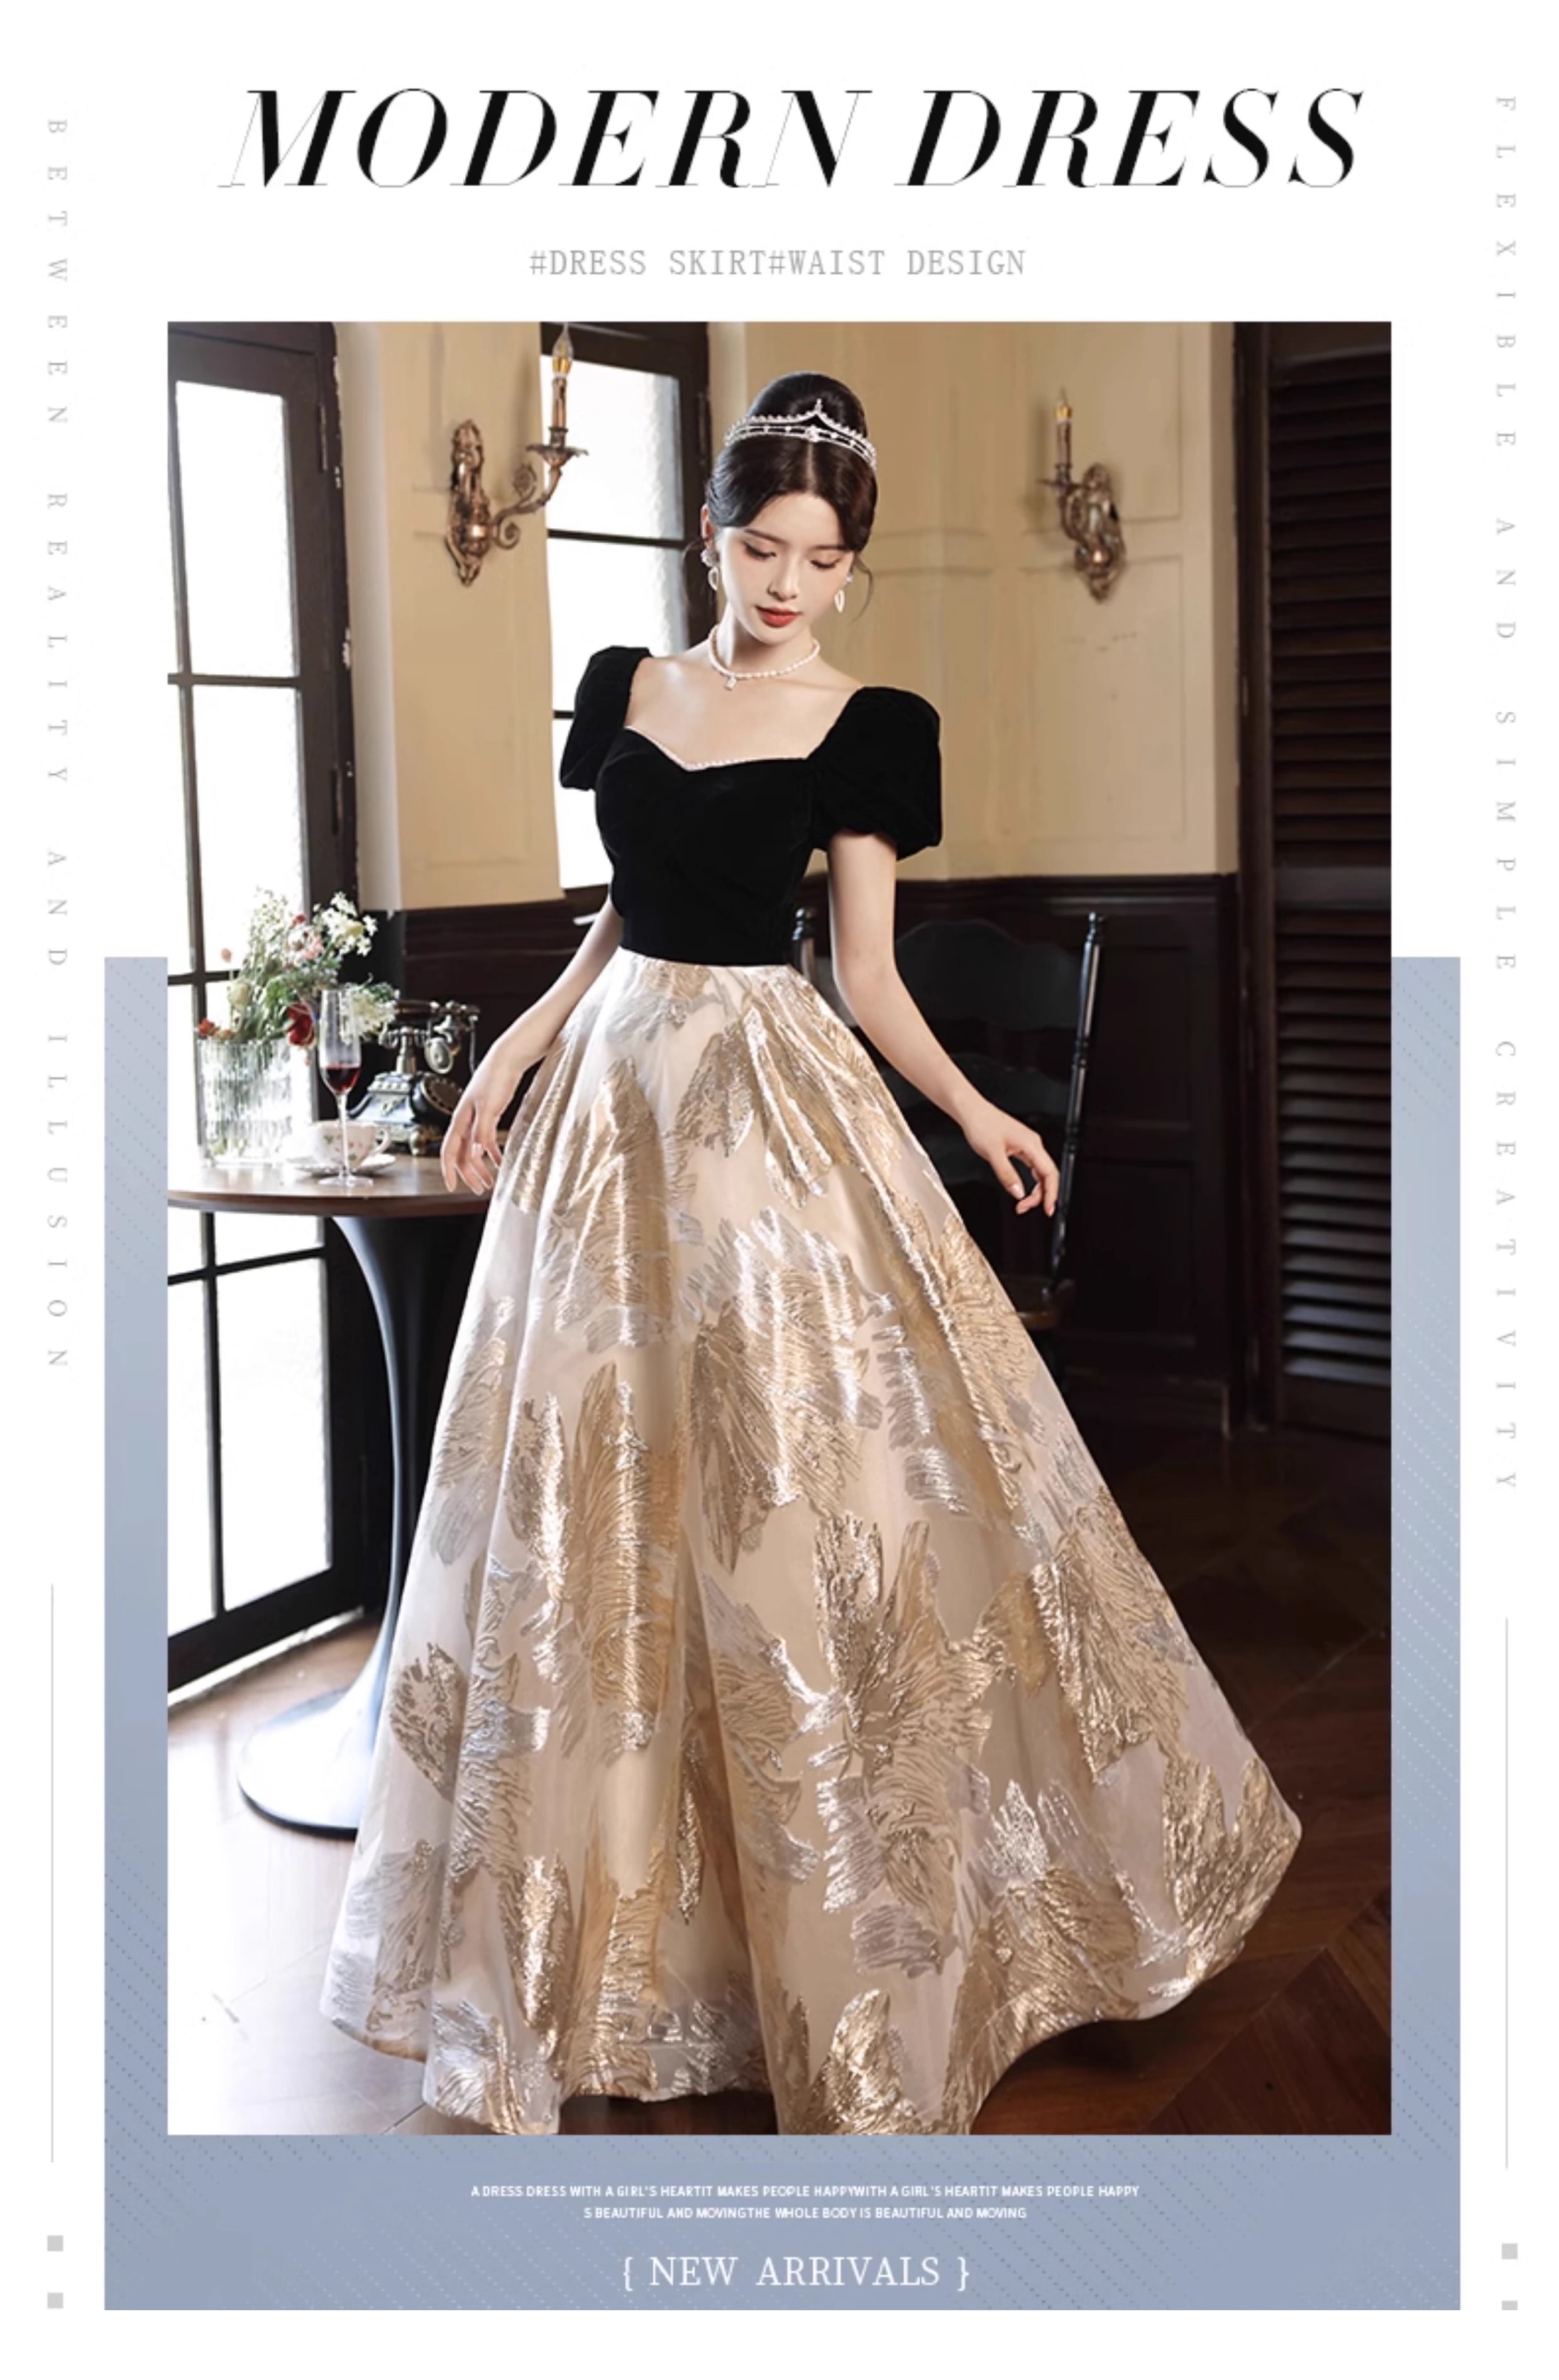 Womens-French-Style-Black-Banquet-Evening-Dress-Party-Ball-Gown06